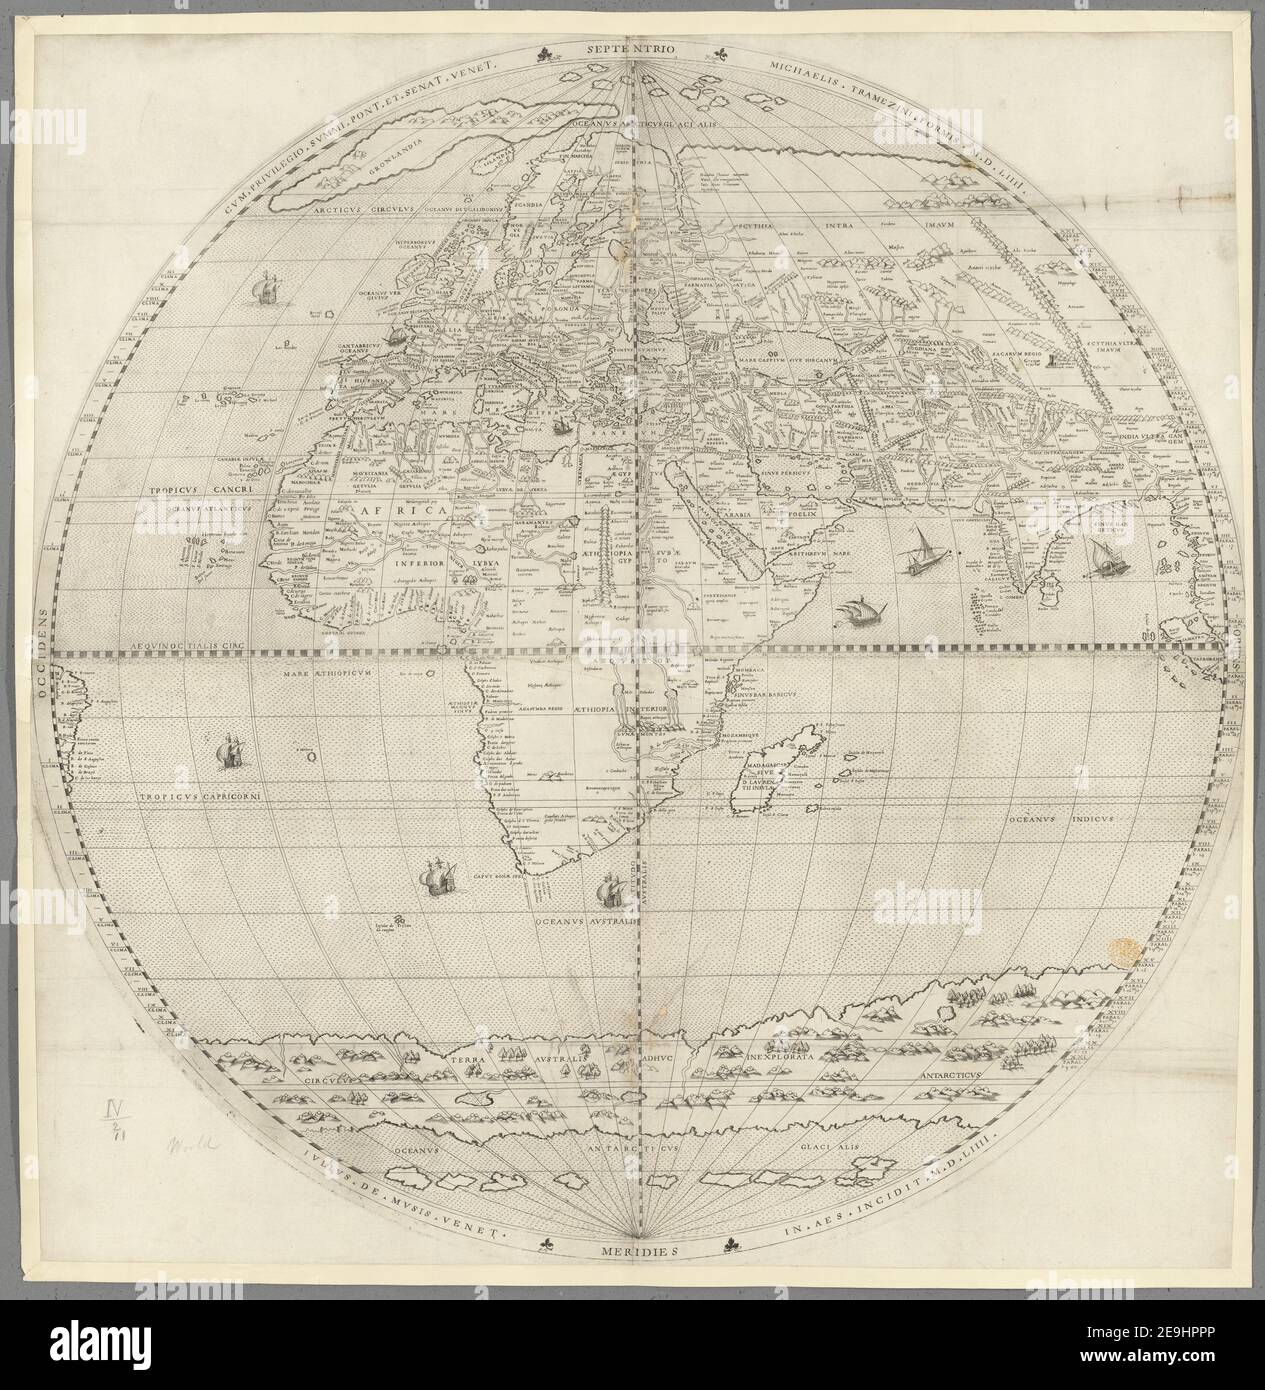 Nova totius Terrarum Orbis tabula, auct. F. de Wit.  In hemispheres on the stereographic projection  Map information:  Title: Nova totius Terrarum Orbis tabula, auct. F. de Wit. [In hemispheres on the stereographic projection] 4.11. 8 tab end.  Item type: 6 tab.  Former owner: George III, King of Great Britain, 1738-1820 Stock Photo